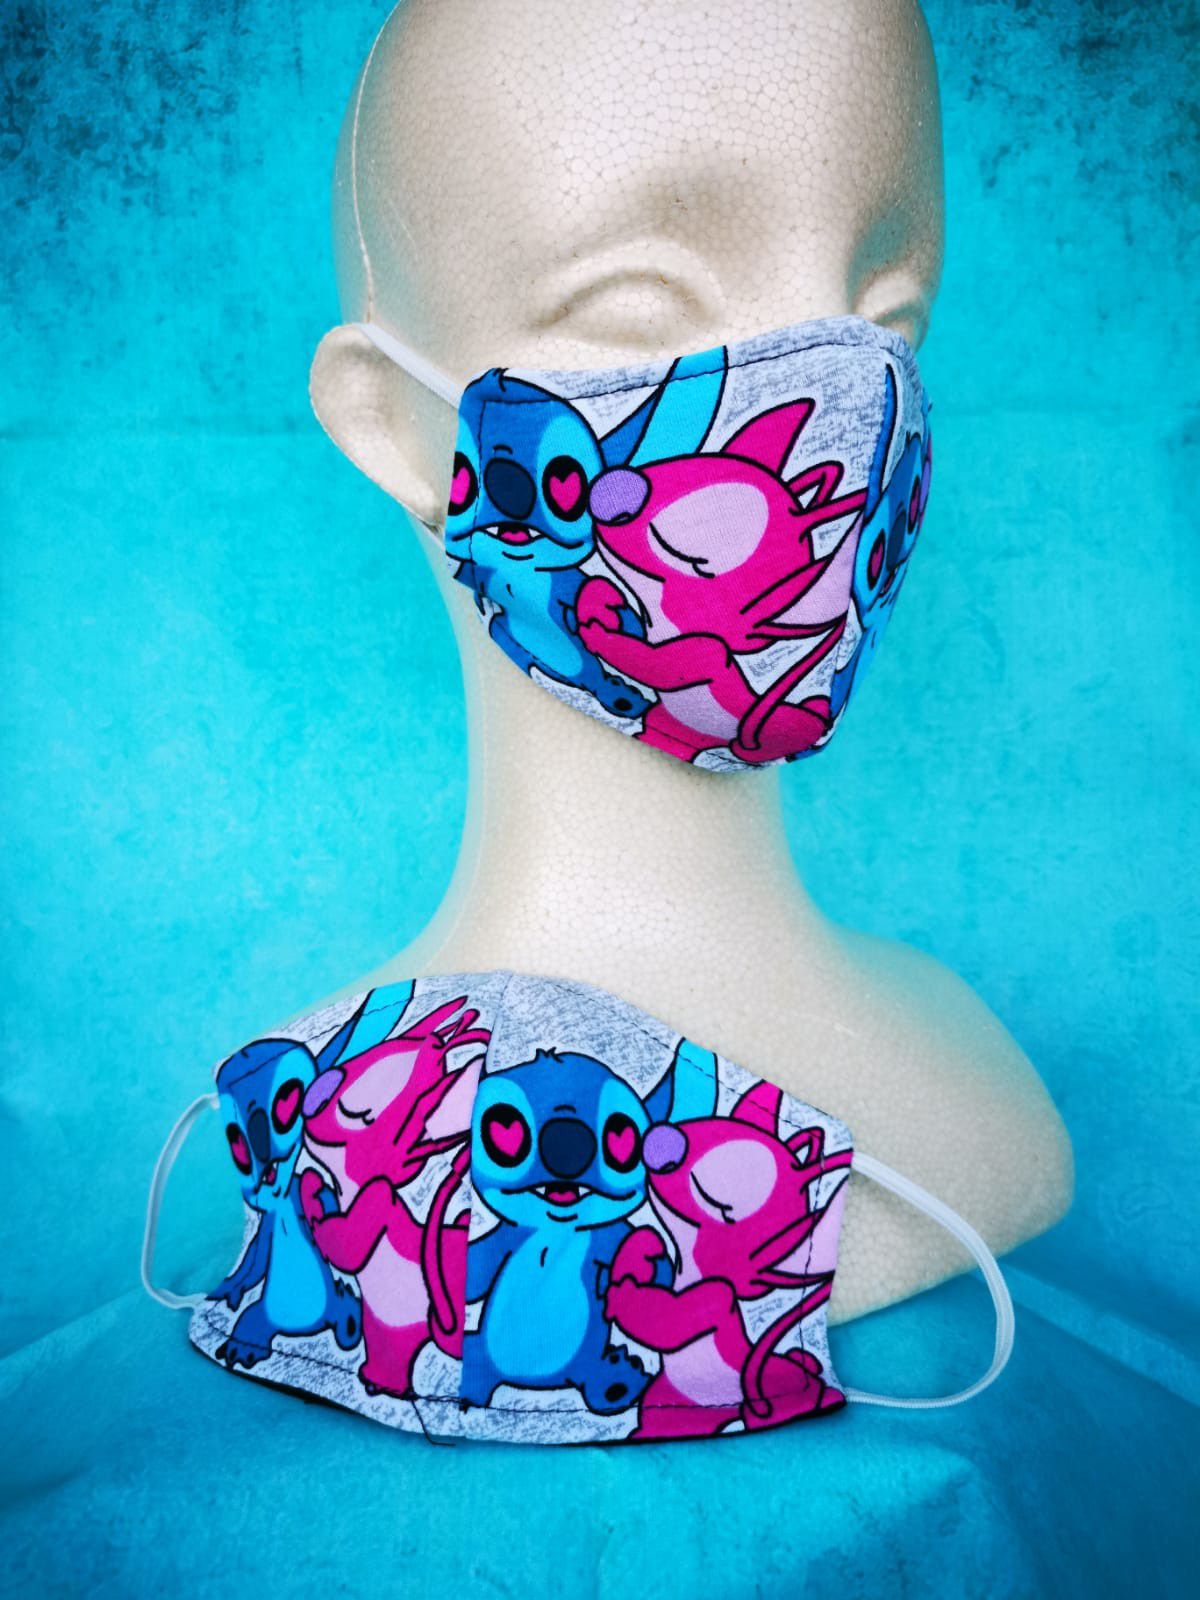 Kids Face mask (Stich & angel): Hand made mask, reversible, reusable, washer and dryer safe. #girls clothes #MAC Makeup #halloween